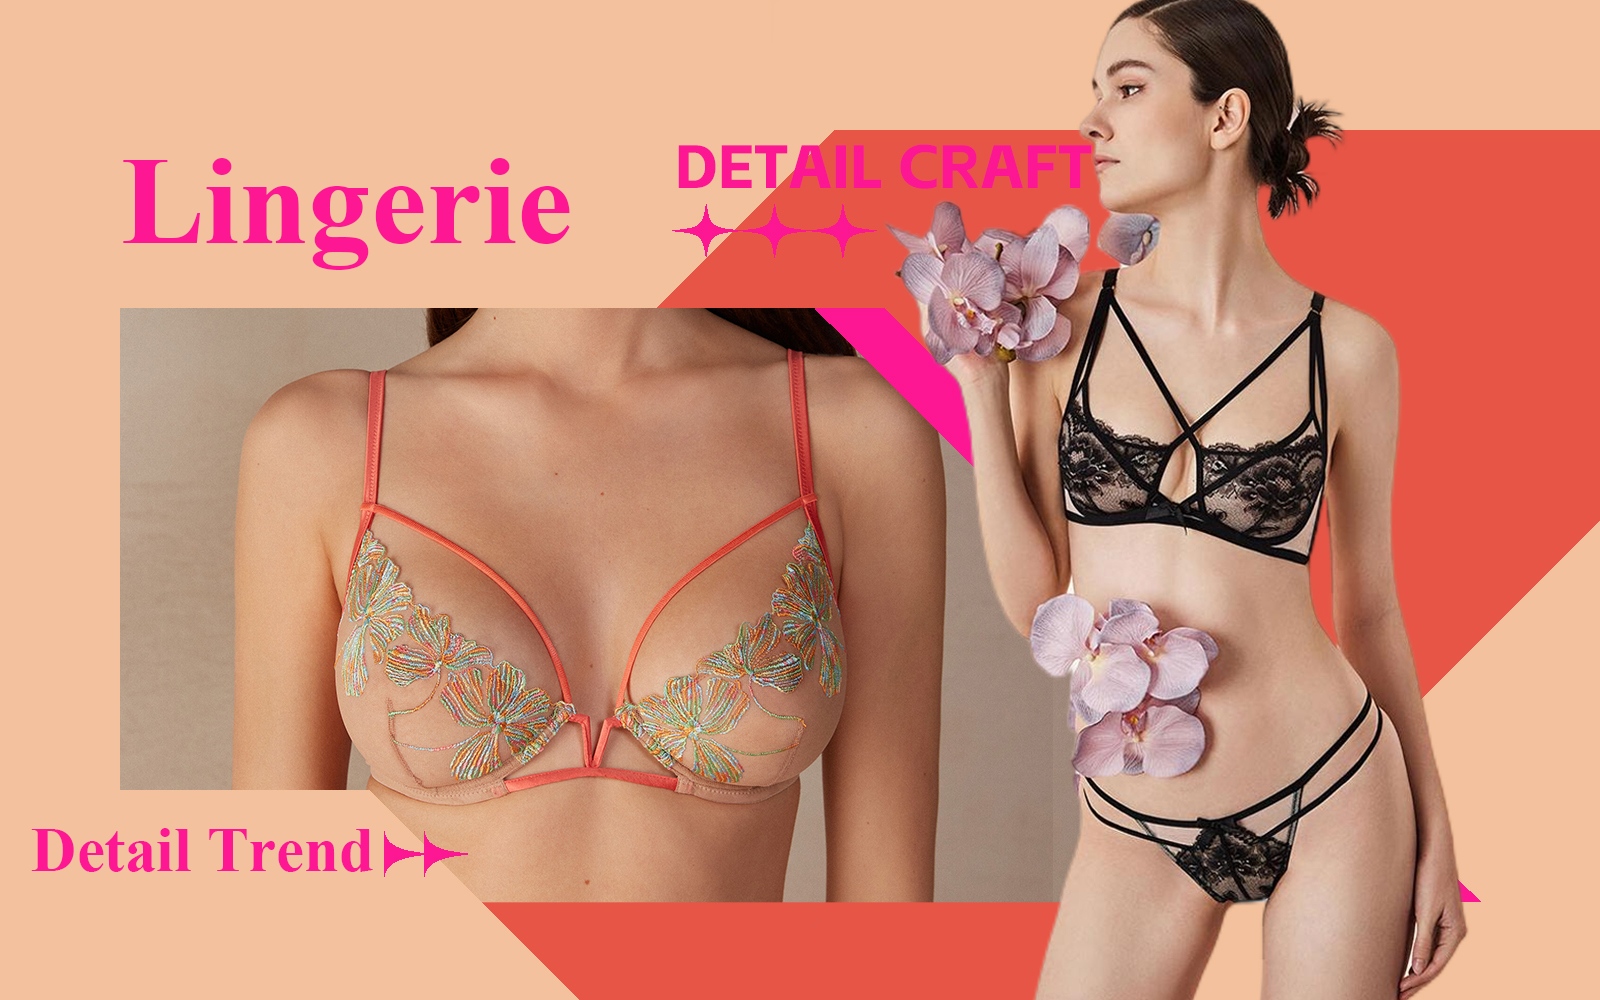 Linear Structure -- The Detail & Craft Trend for Lingerie